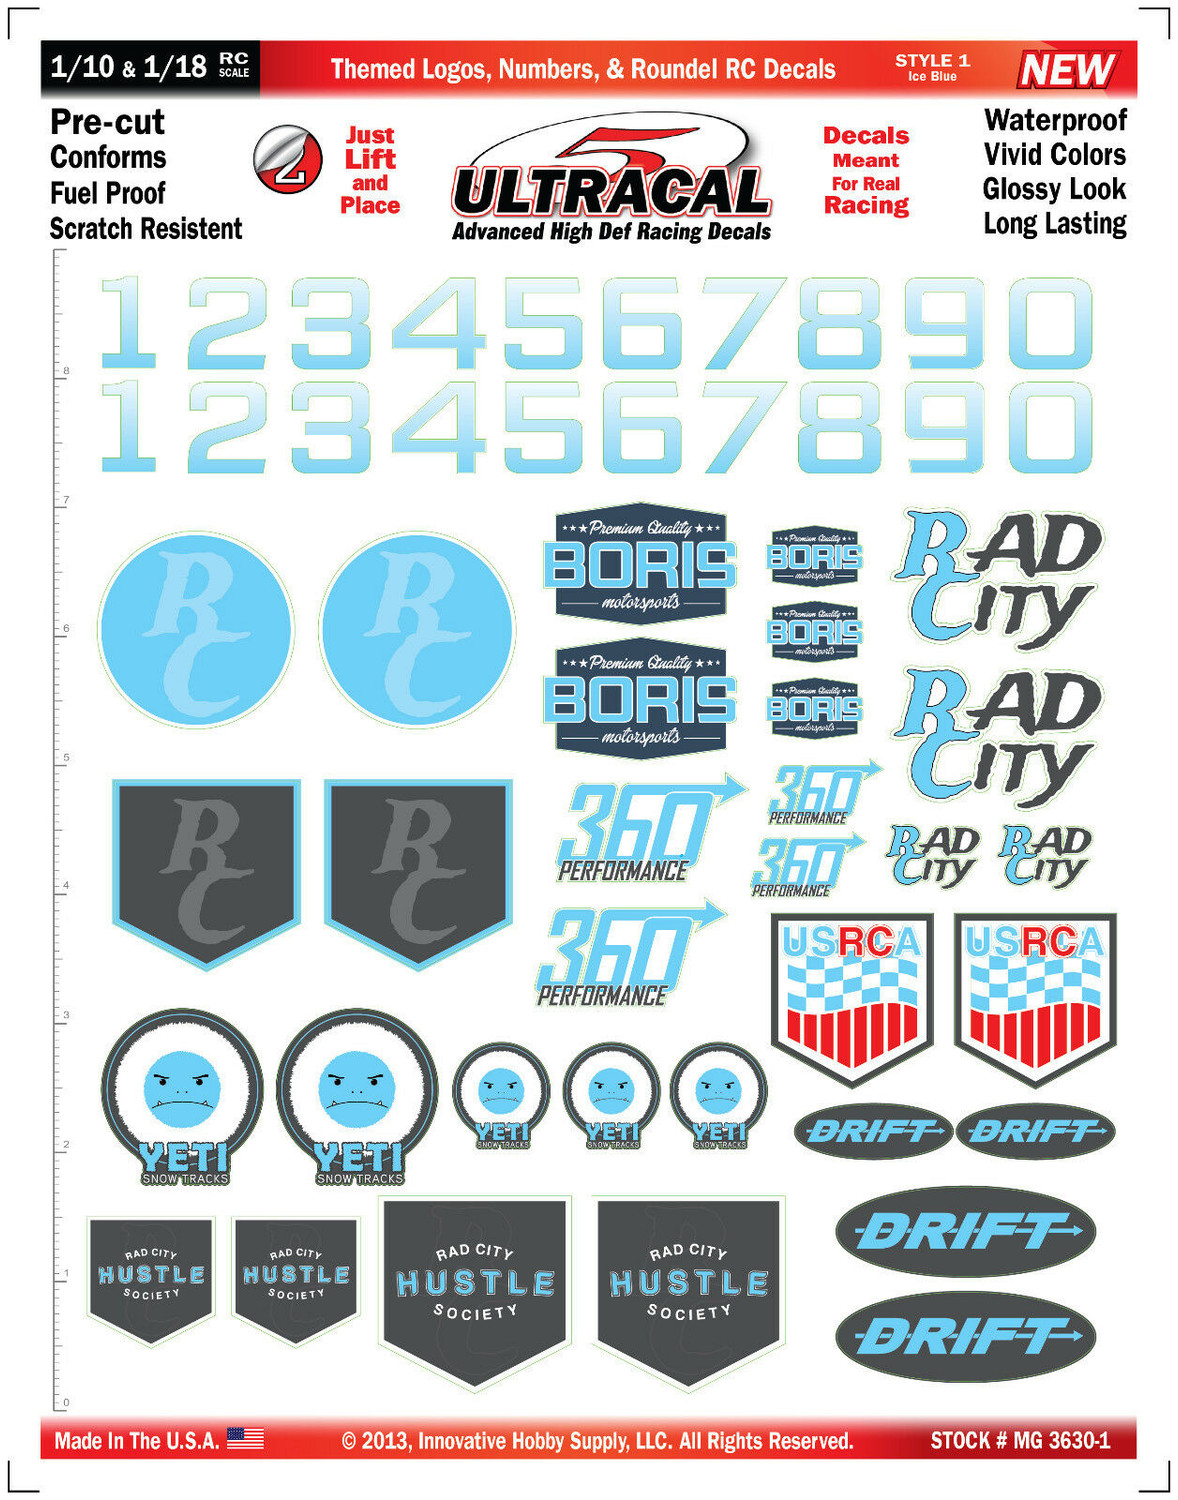 MG 3630-1 Ultracal Ice Blue Themed Logos, Numbers, & Roundel RC Decals for 1:10 and 1:18 Scale